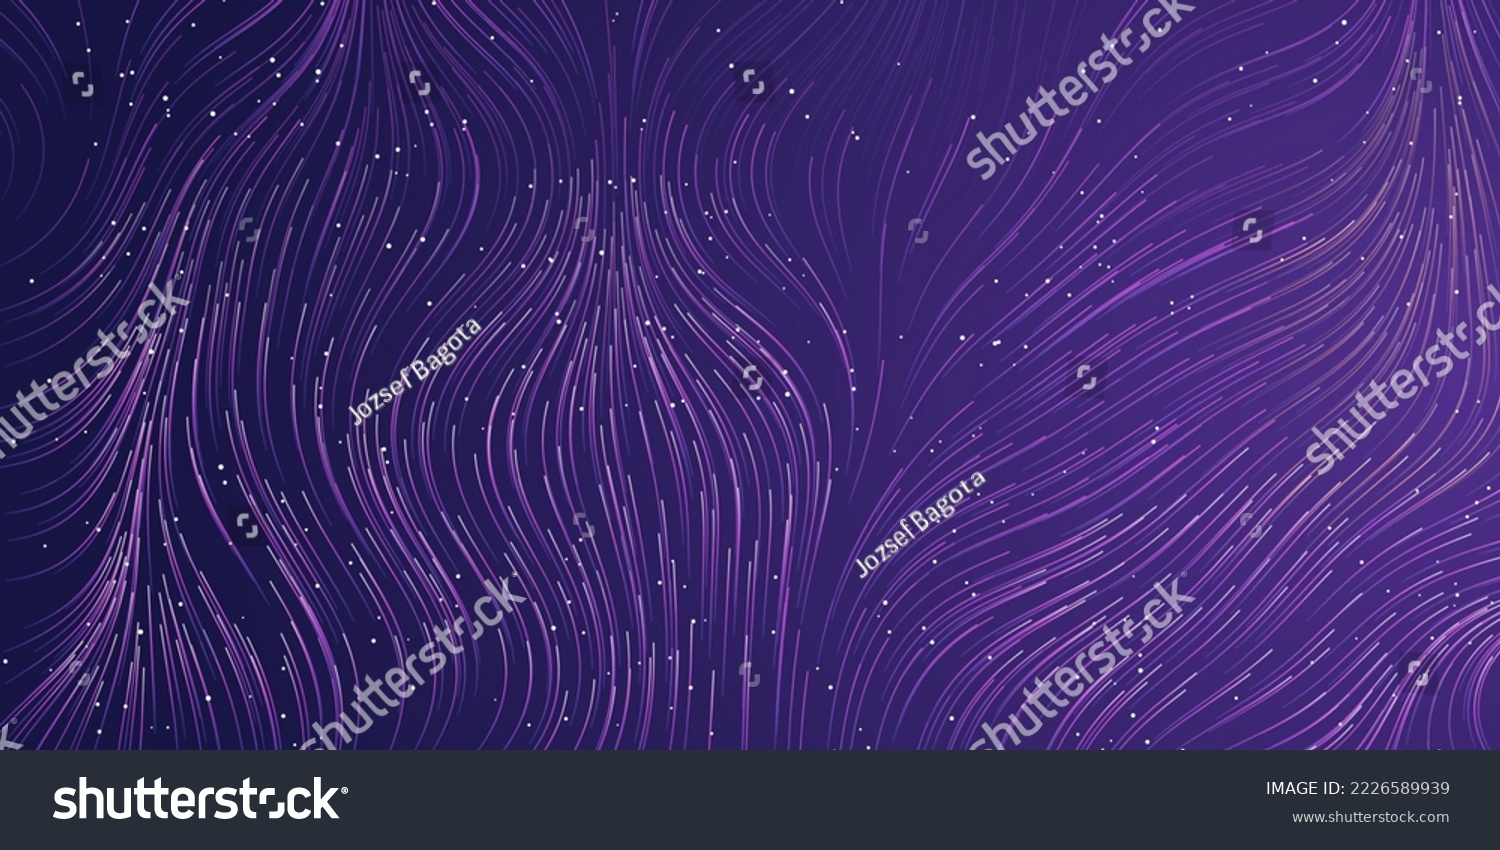 SVG of Dark Purple Curving, Bending, Flowing Energy Lines Pattern on Starry Sky - Modern Style Futuristic Technology, Science or Astronomy Concept Background, Generative Art, Creative Template, Vector Design svg